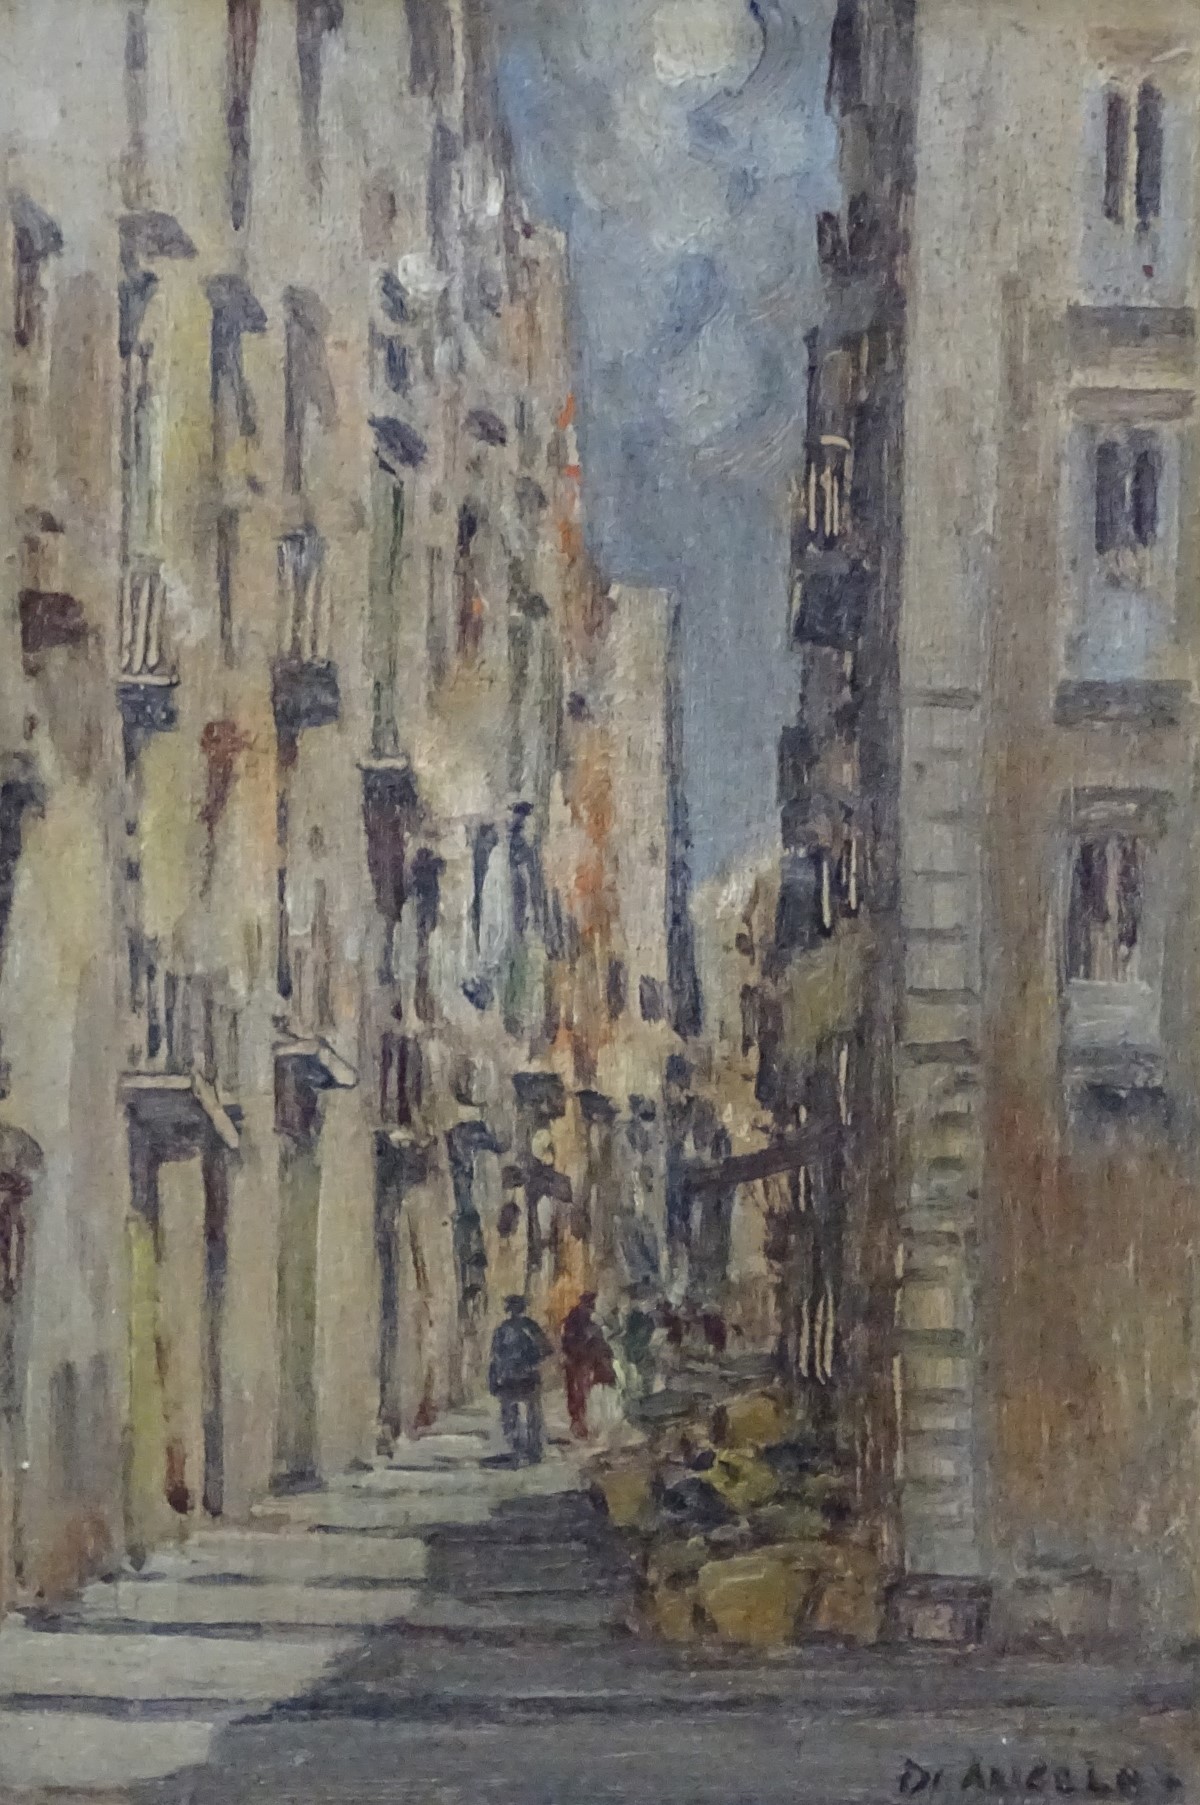 D. Angelos, XIX, Oil on panel, An Italian street scene with figures, Signed lower right. - Image 7 of 8